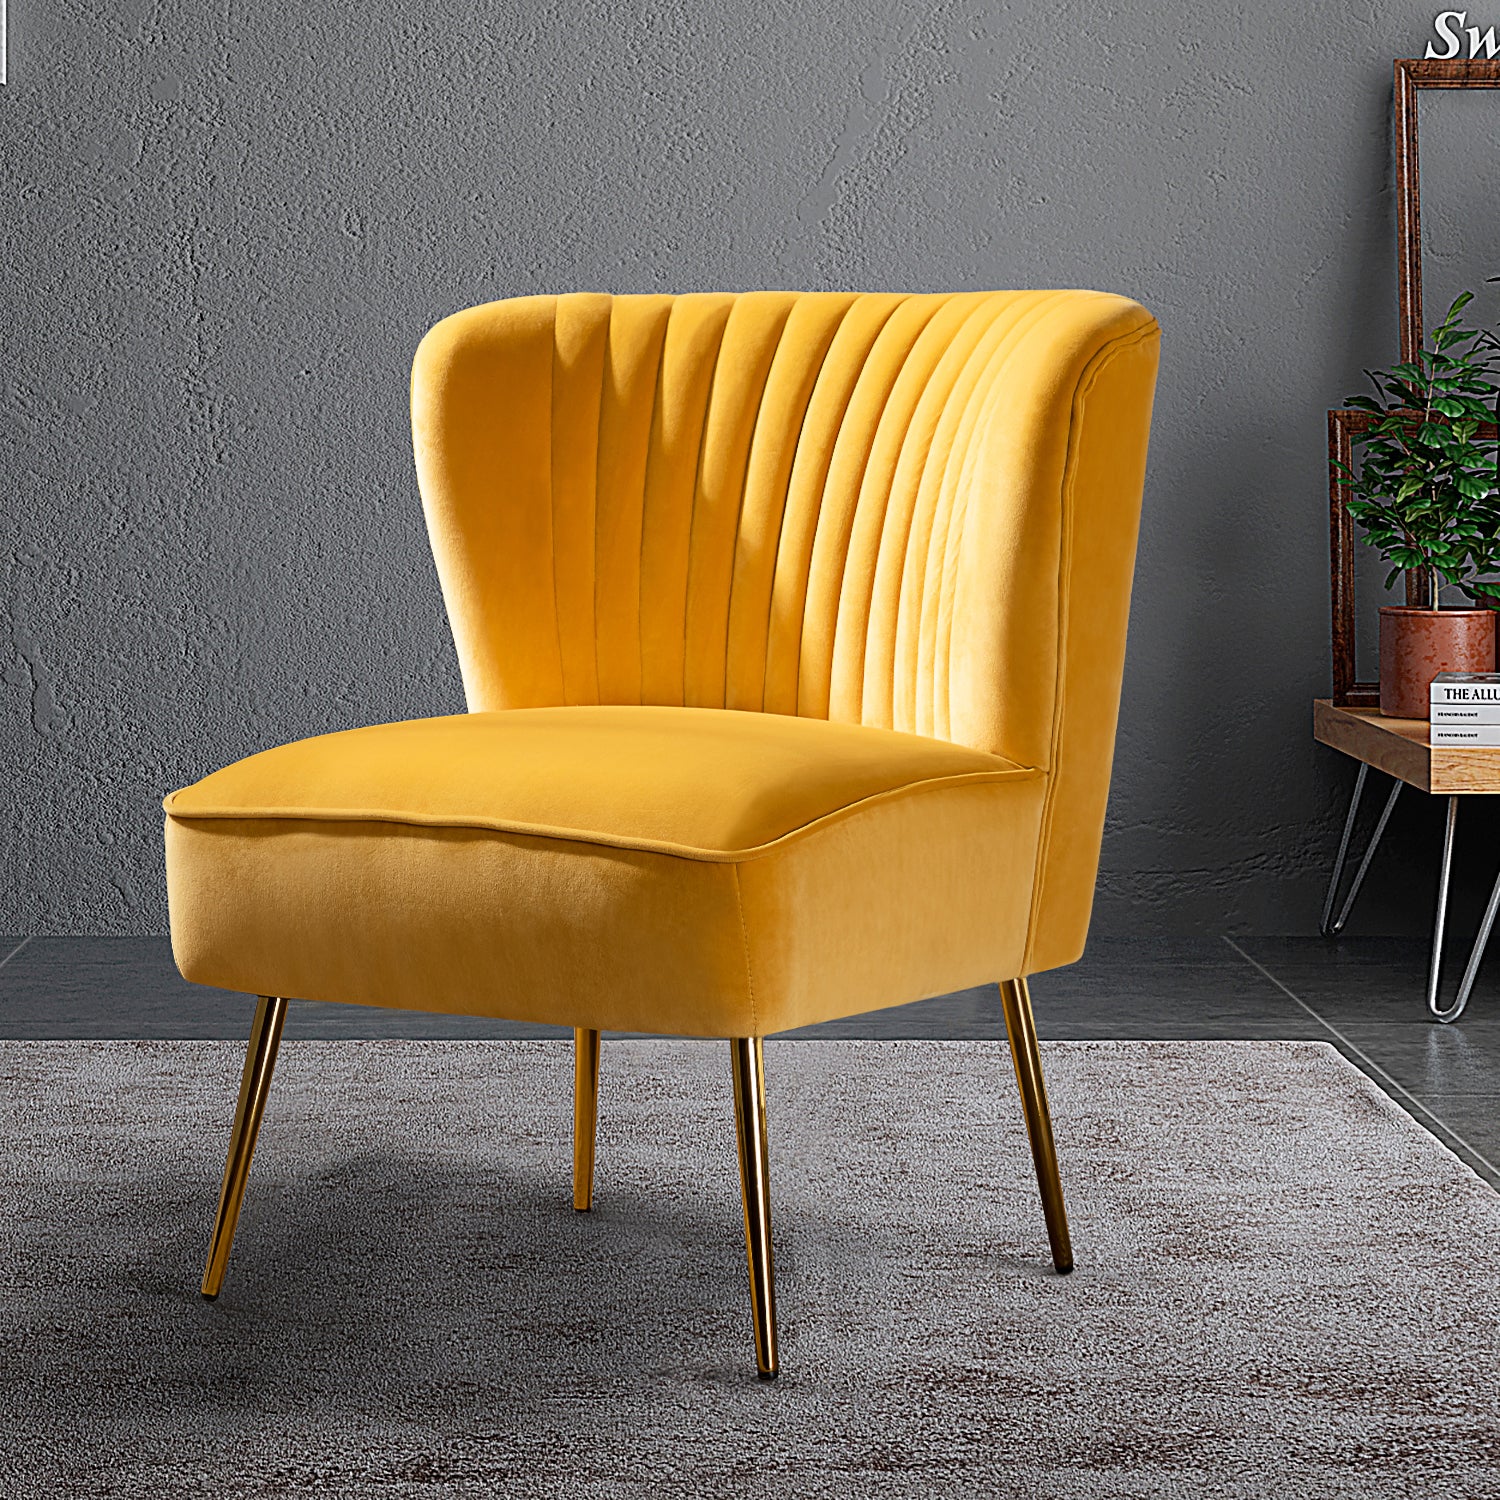 18 Best Cheap Accent Chairs To Live Up Your Space